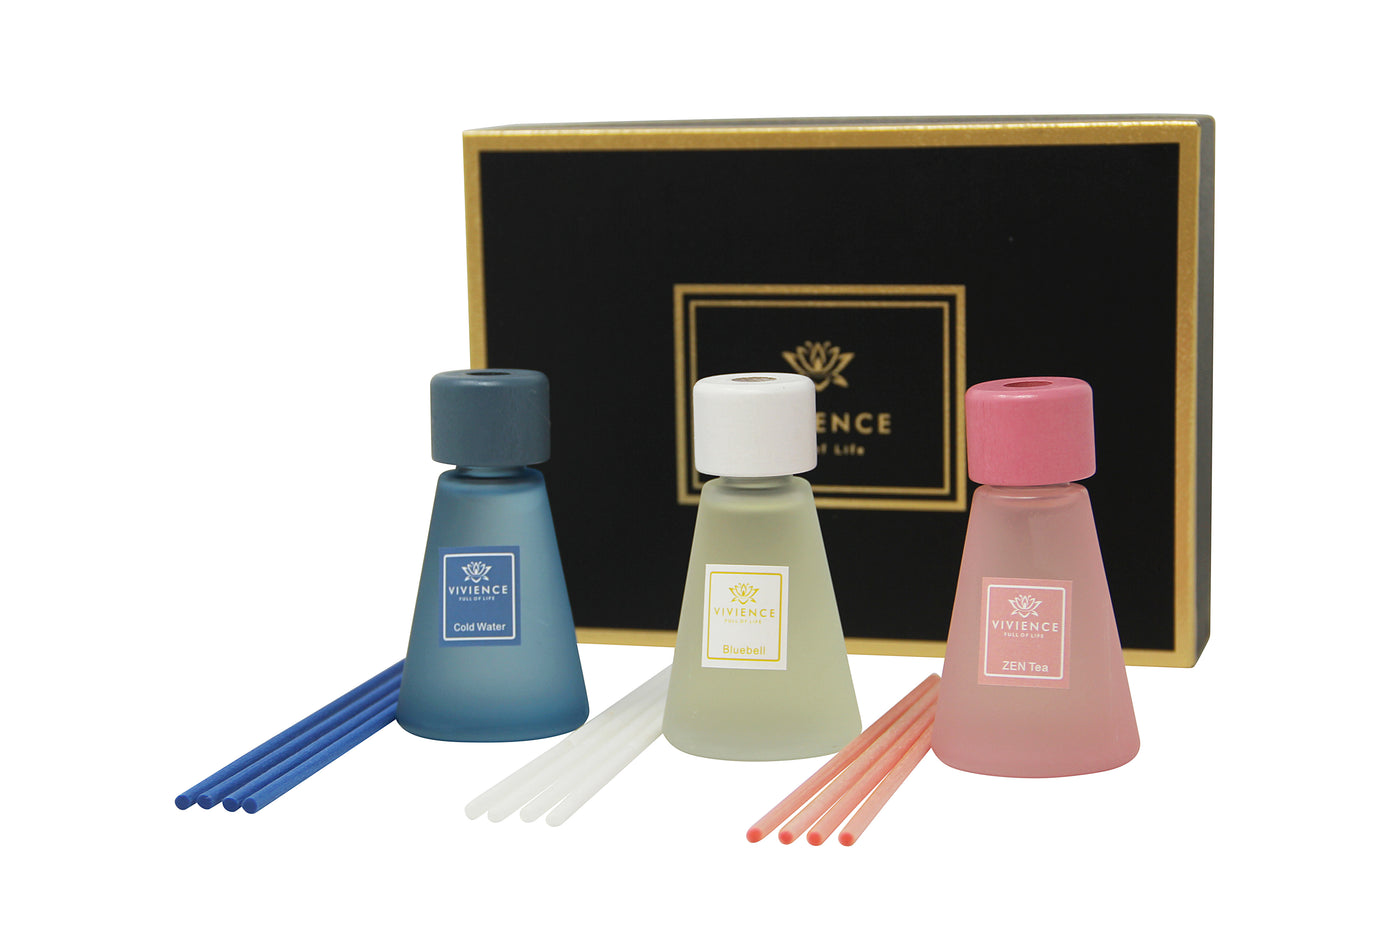 Set of 3 Cone Shaped Reed Diffusers Assorted Colors